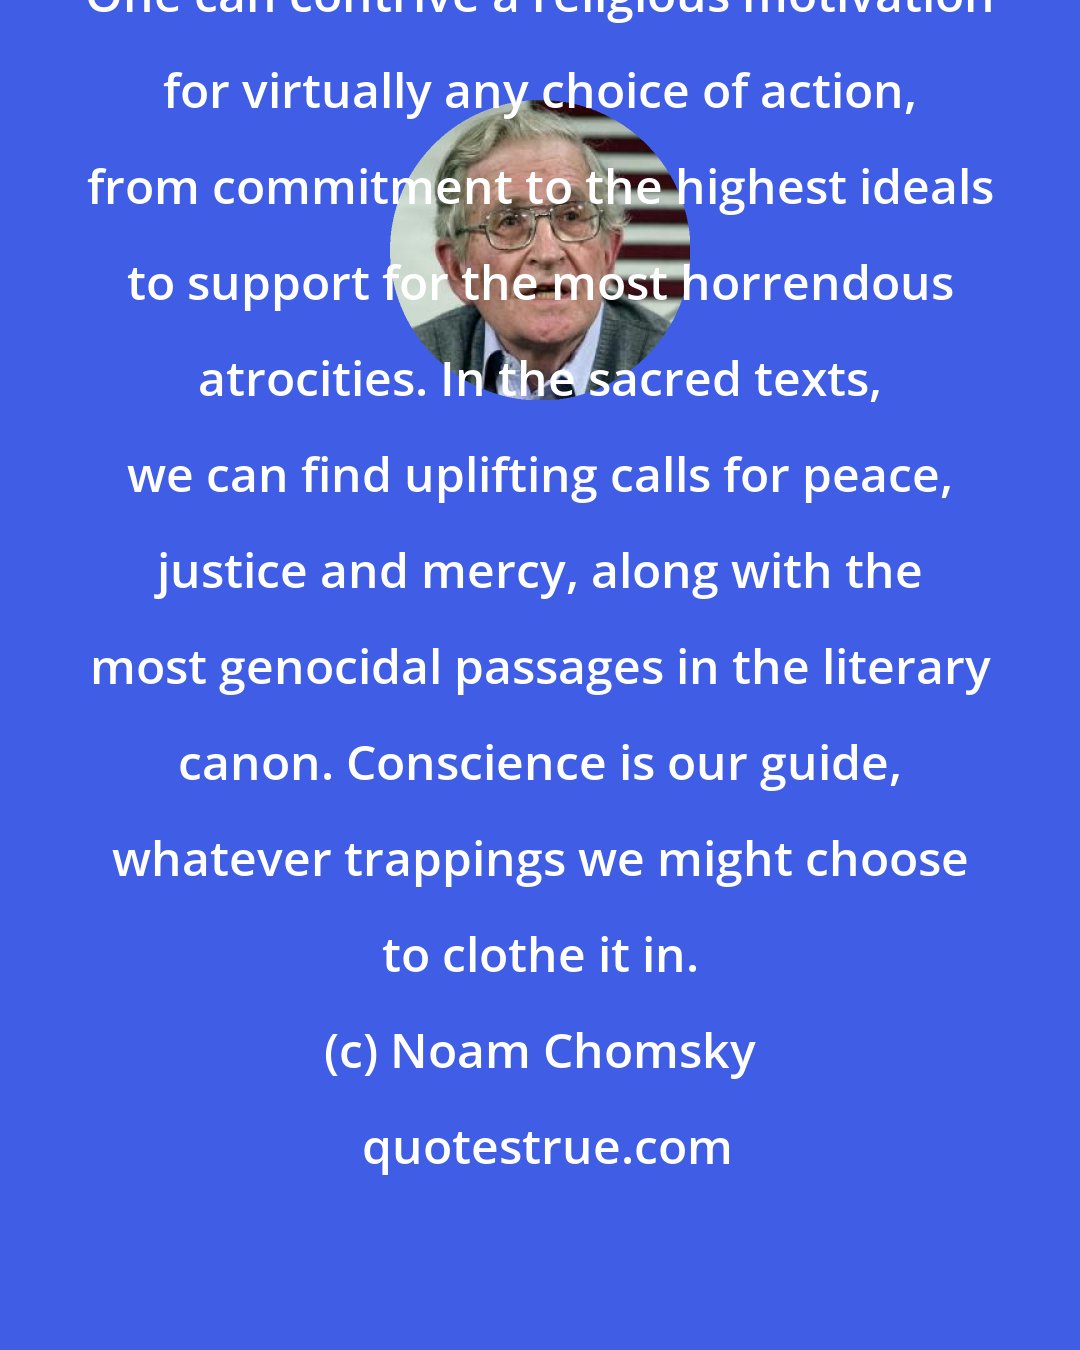 Noam Chomsky: One can contrive a religious motivation for virtually any choice of action, from commitment to the highest ideals to support for the most horrendous atrocities. In the sacred texts, we can find uplifting calls for peace, justice and mercy, along with the most genocidal passages in the literary canon. Conscience is our guide, whatever trappings we might choose to clothe it in.